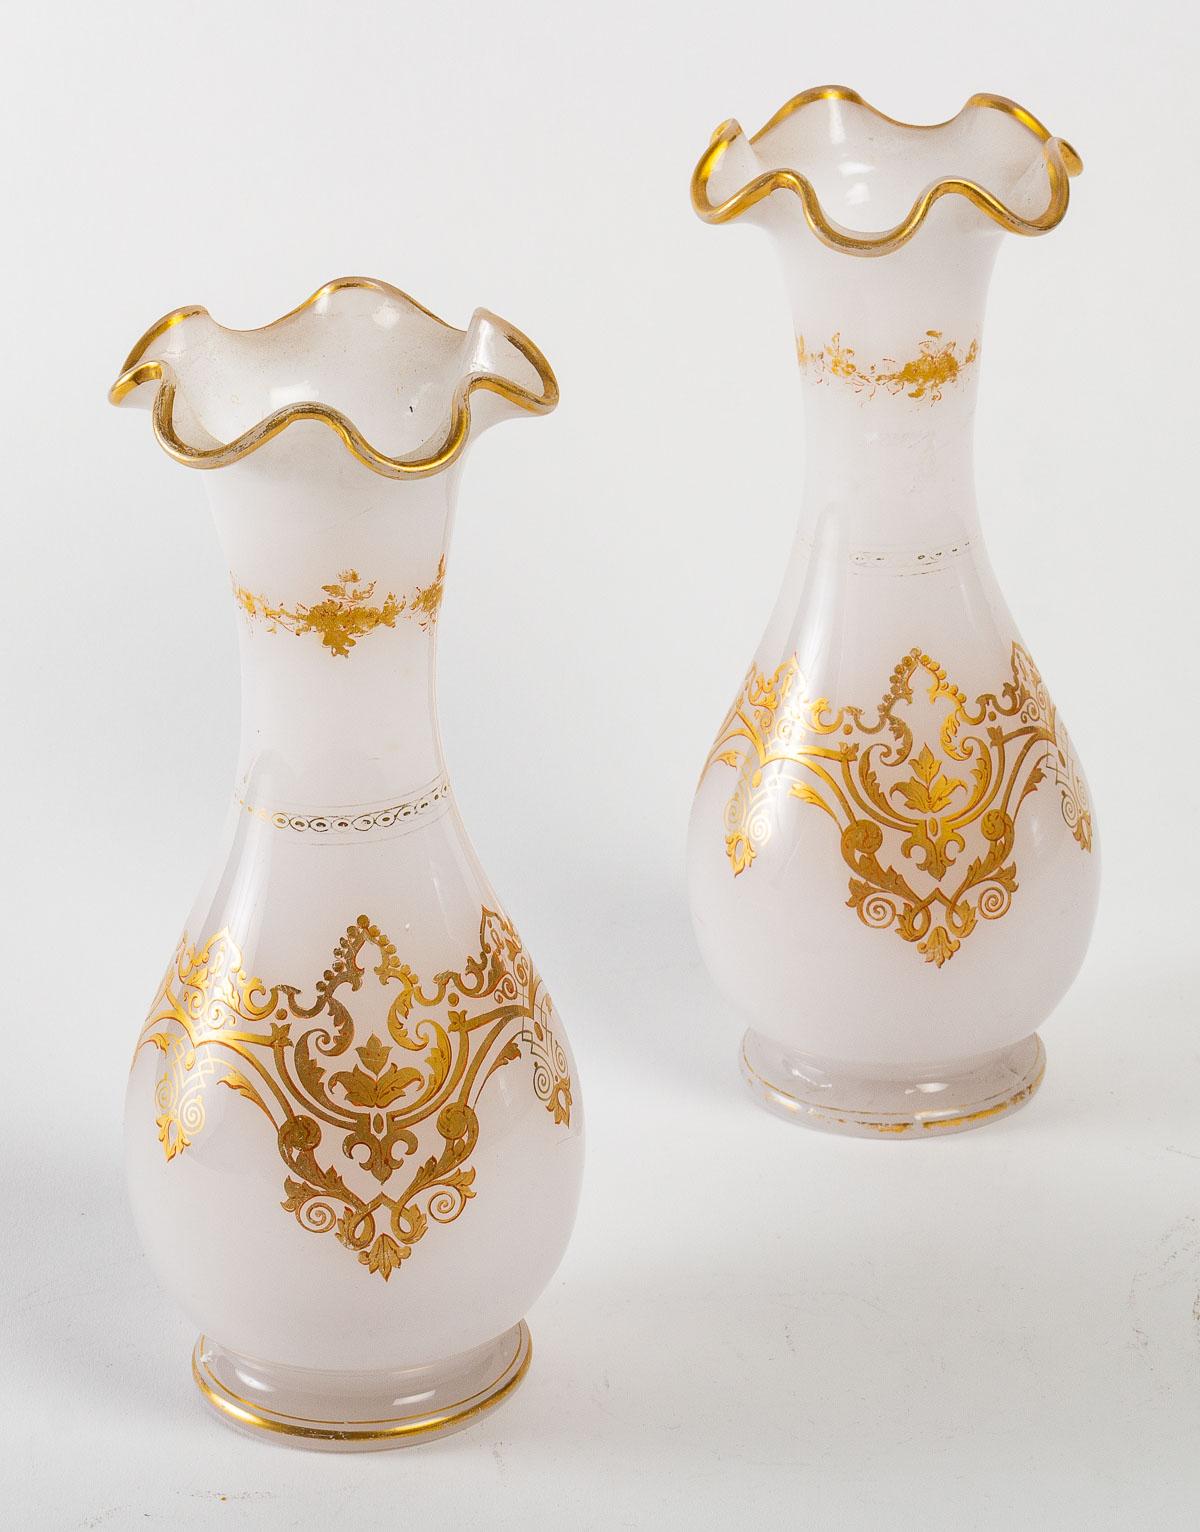 A pair of White Opaline Vases enamelled with gold, 19th century, Napoleon III period.
Measure: H: 26 cm, D: 12 cm.